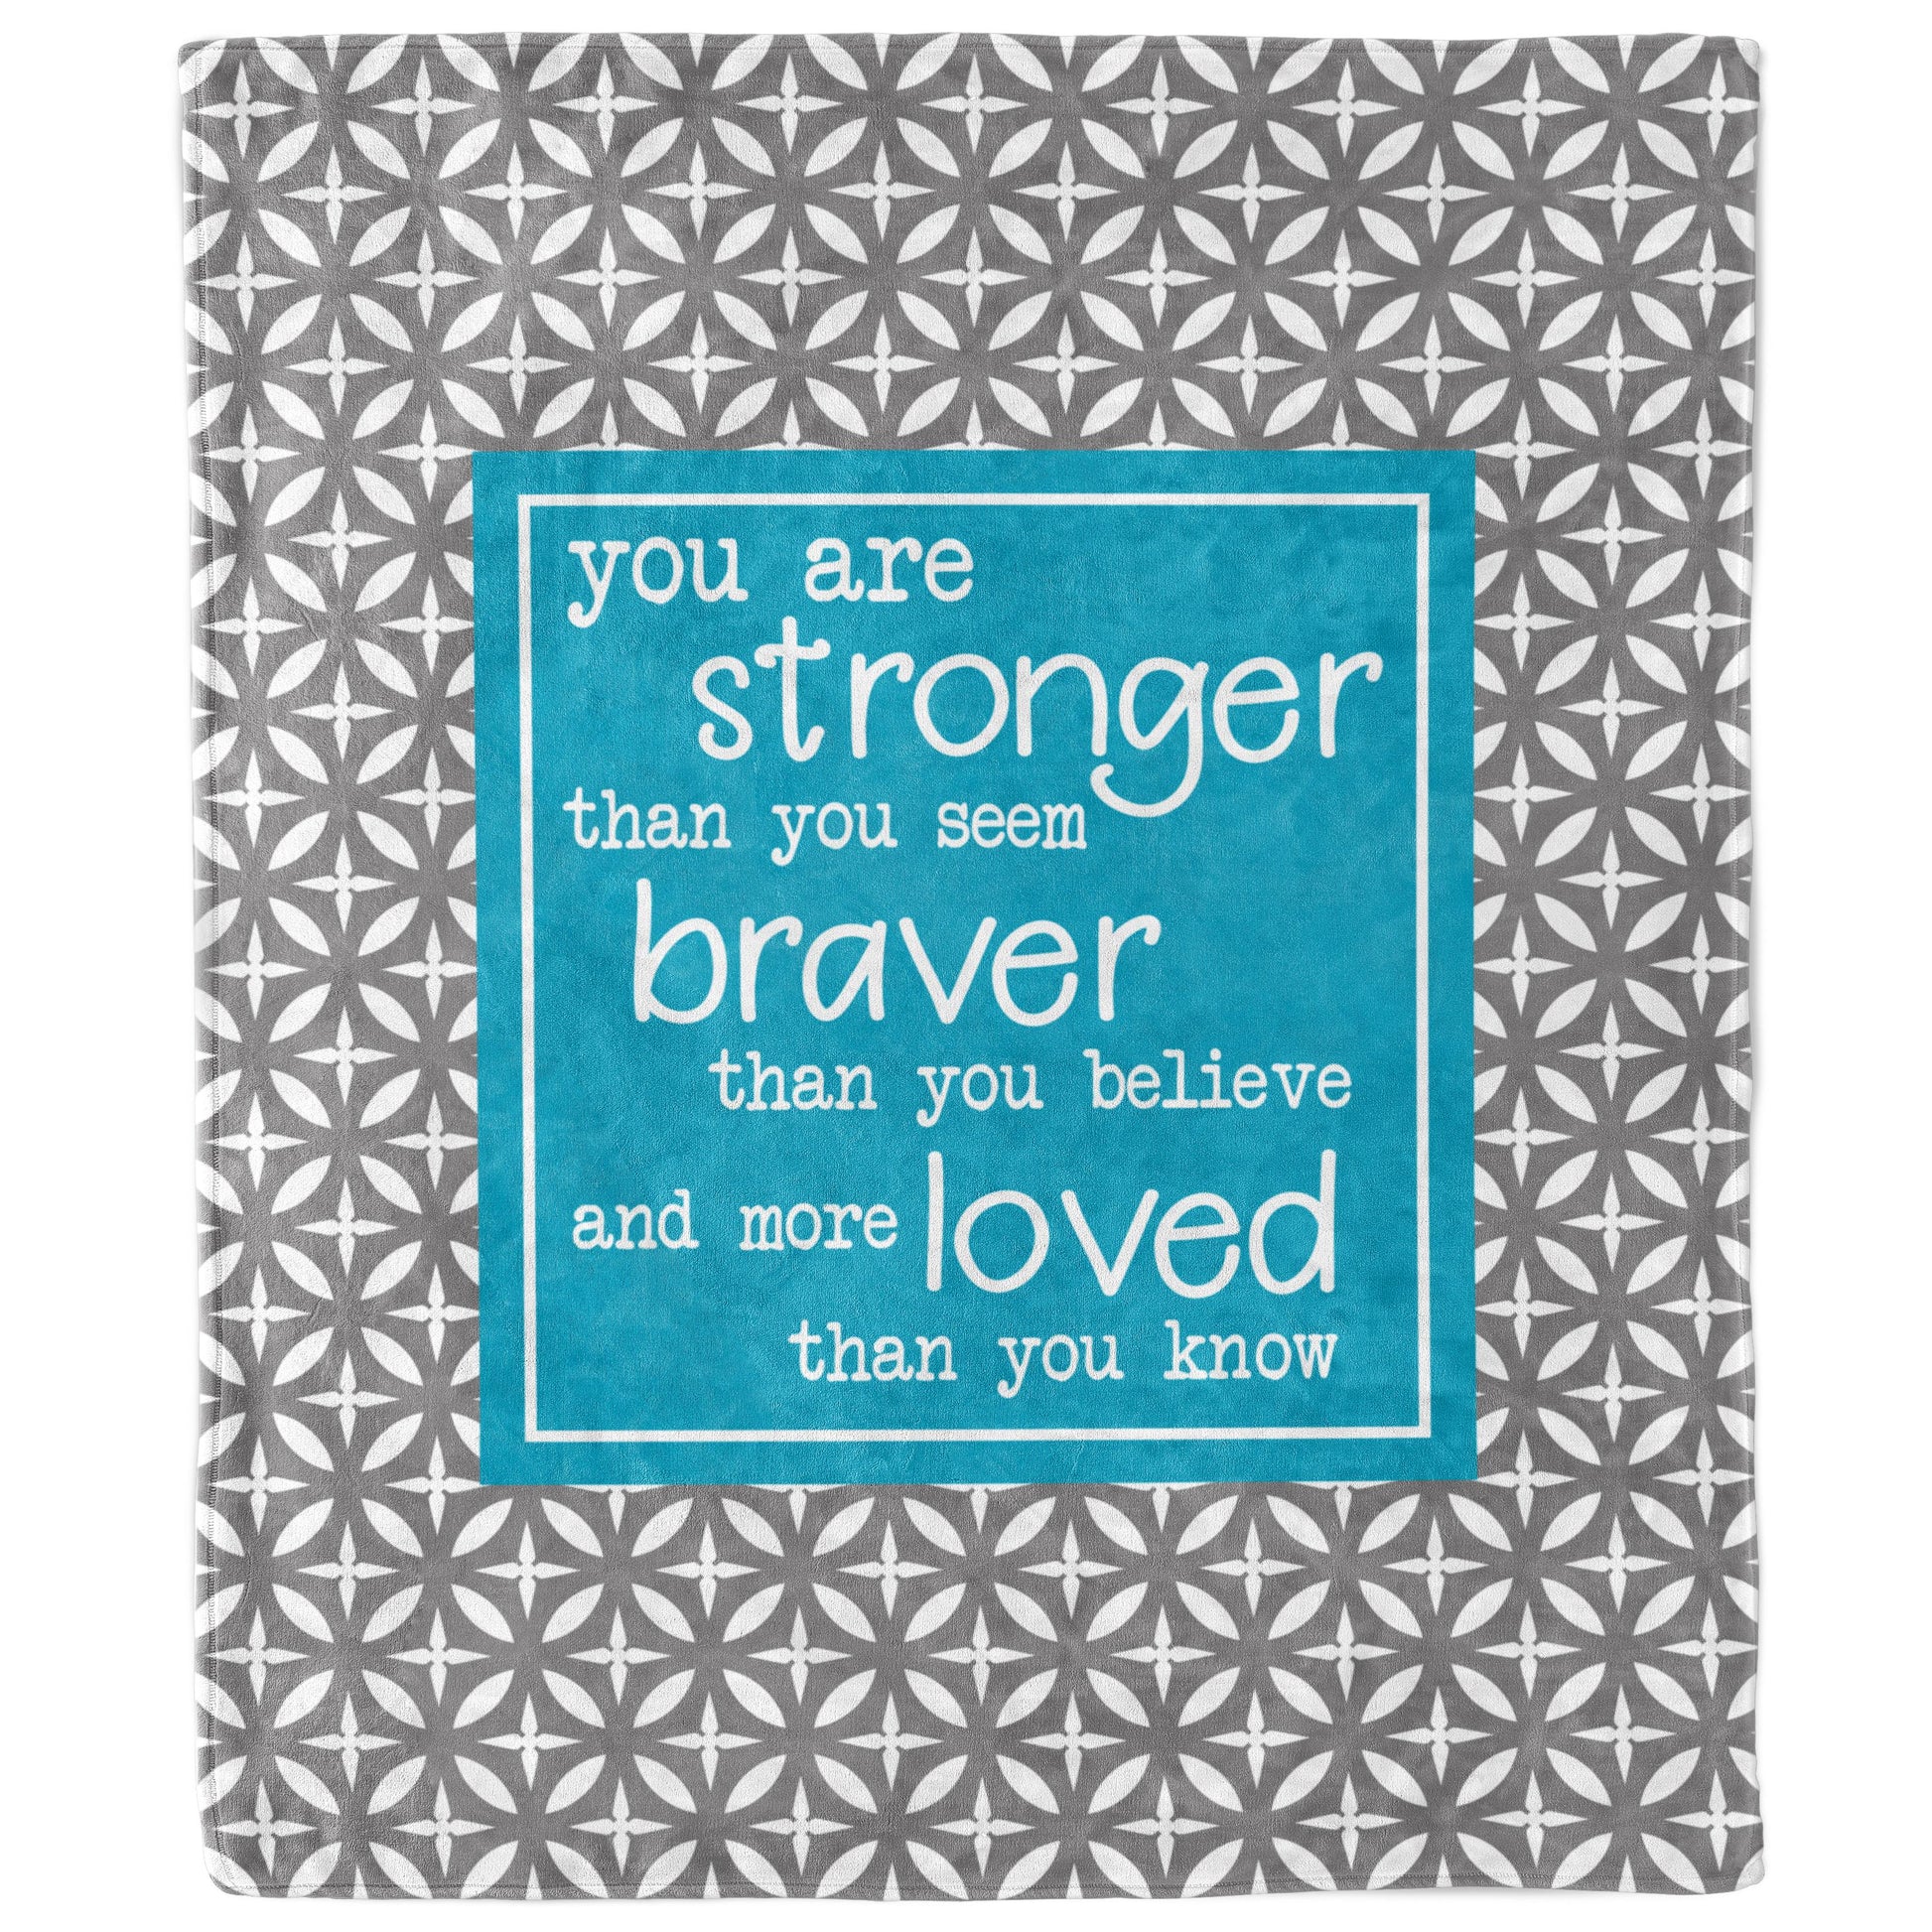 You Are Stronger Braver Loved More Than You Know Gray and Teal Blanket-Luxe Palette